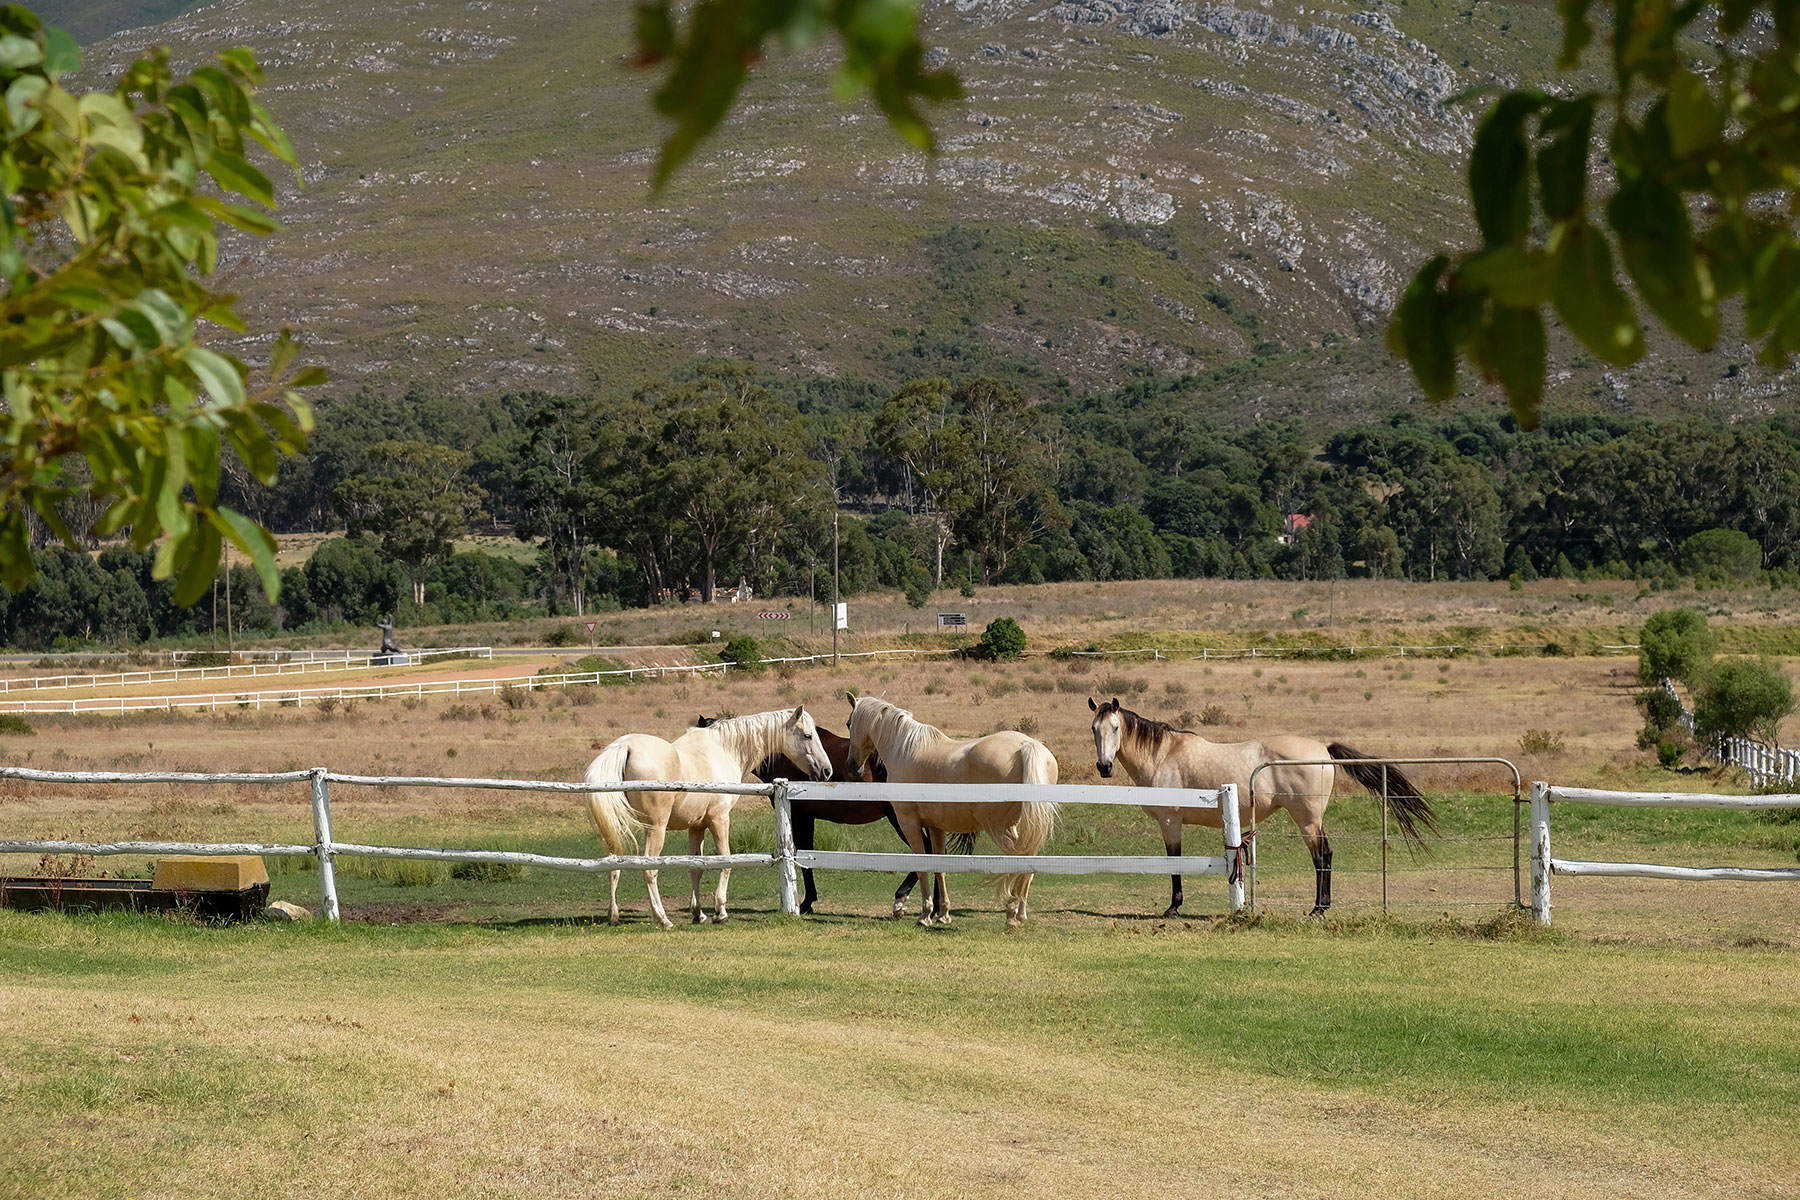 Stanford Valley Guest Farm